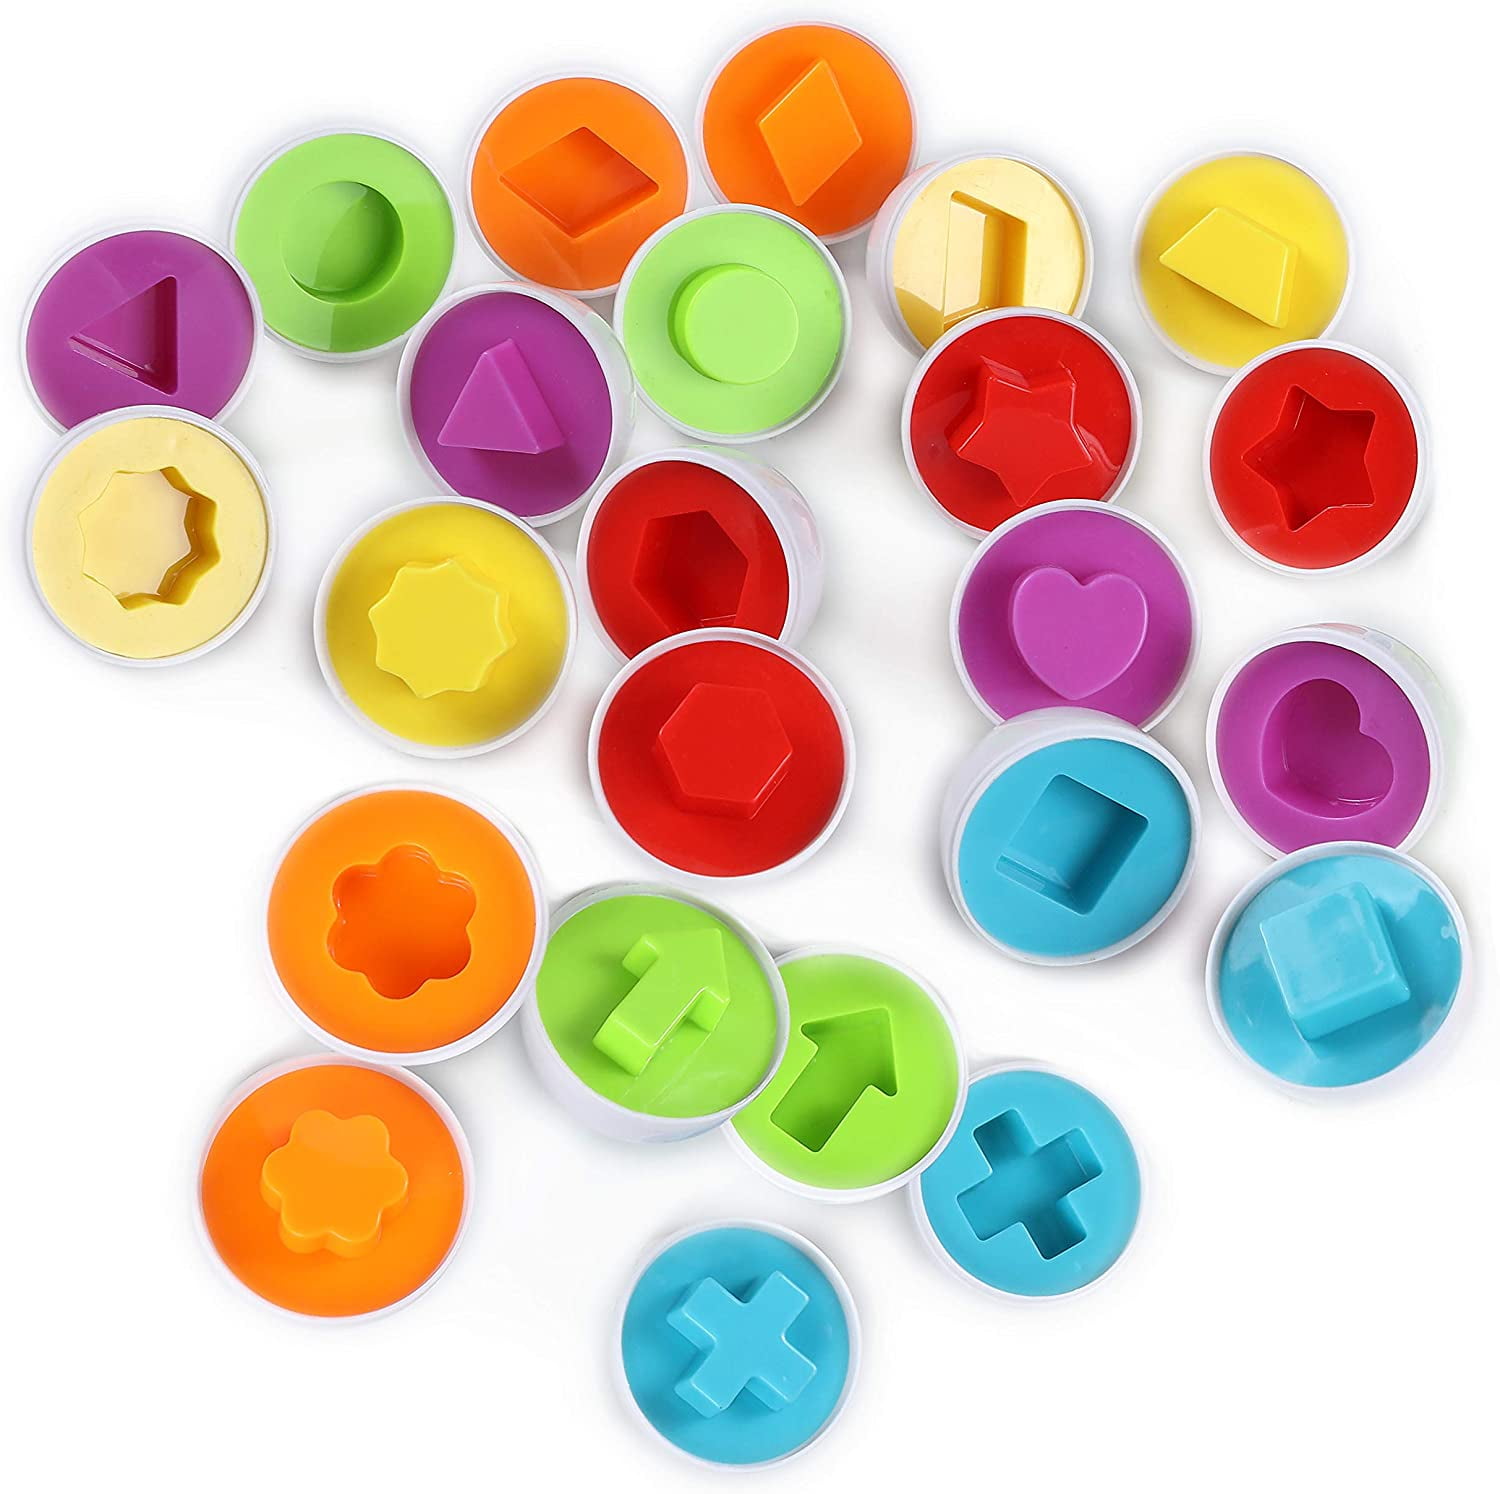 6PCS Egg Toy - Shapes Matching Eggs Toddler Toys for 1, 2, 3, 4 Year